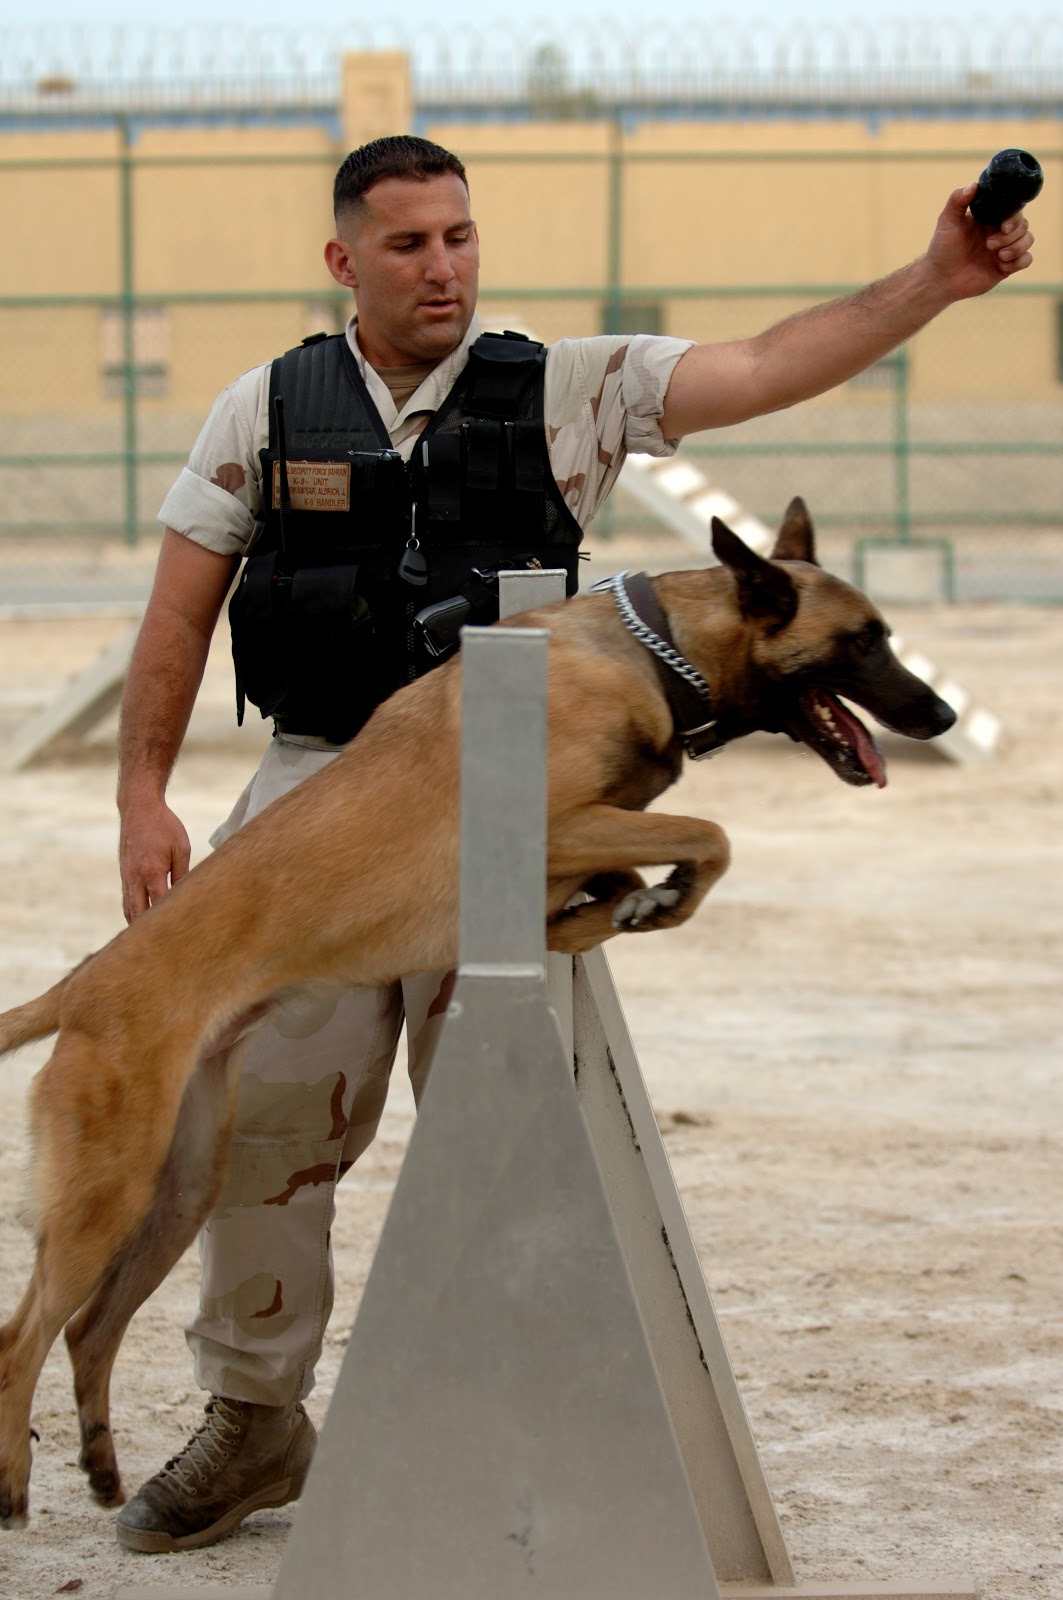 Master-at-Arms 2nd Class Jeremy Aldrich, attached to Naval Security Force, K-9 Unit, and his military working dog Tyson.